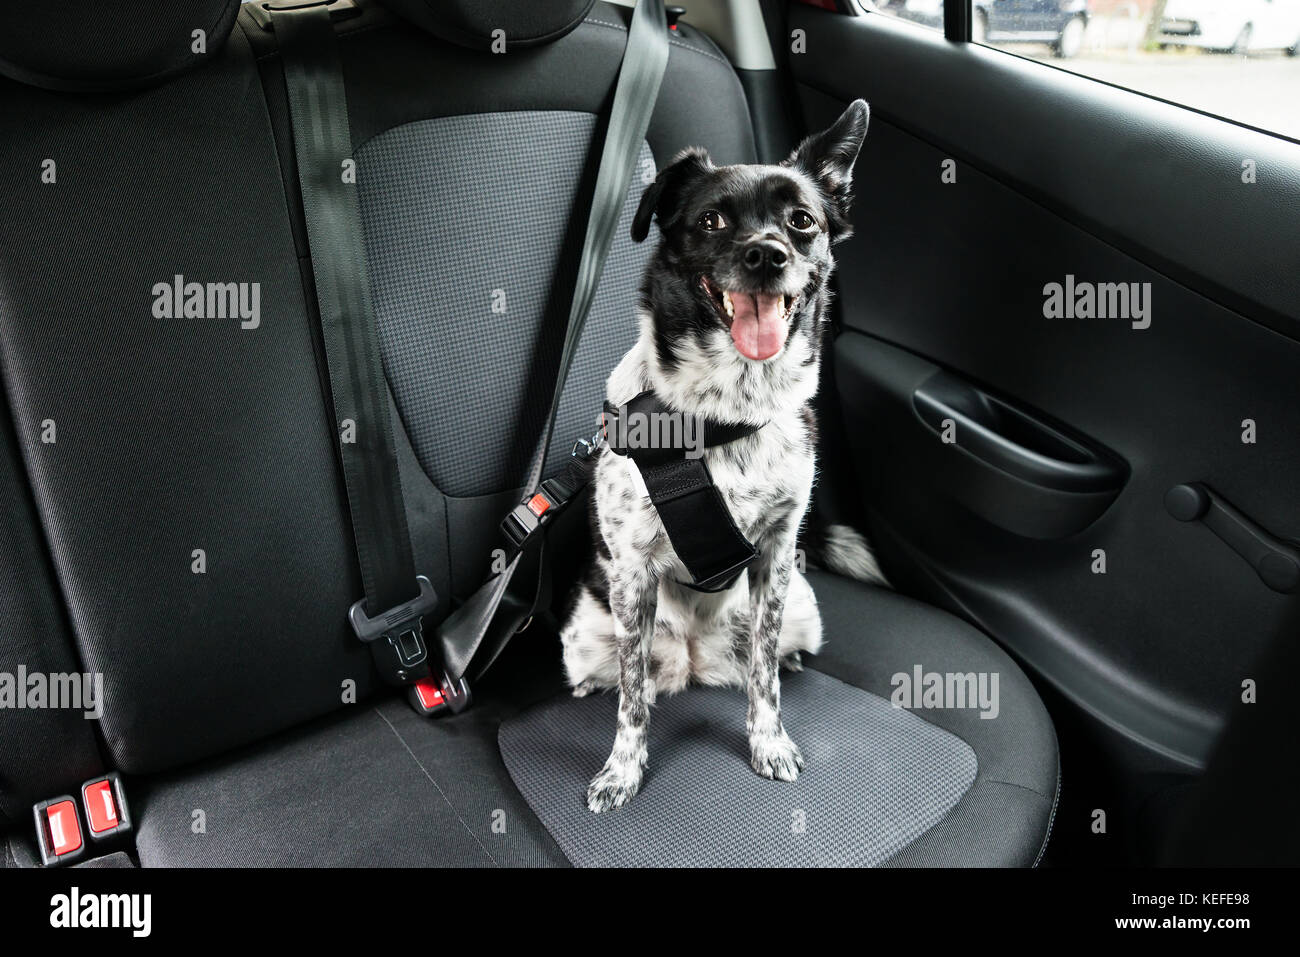 Dog With Sticking Out Tongue Sitting In A Car Seat Stock Photo